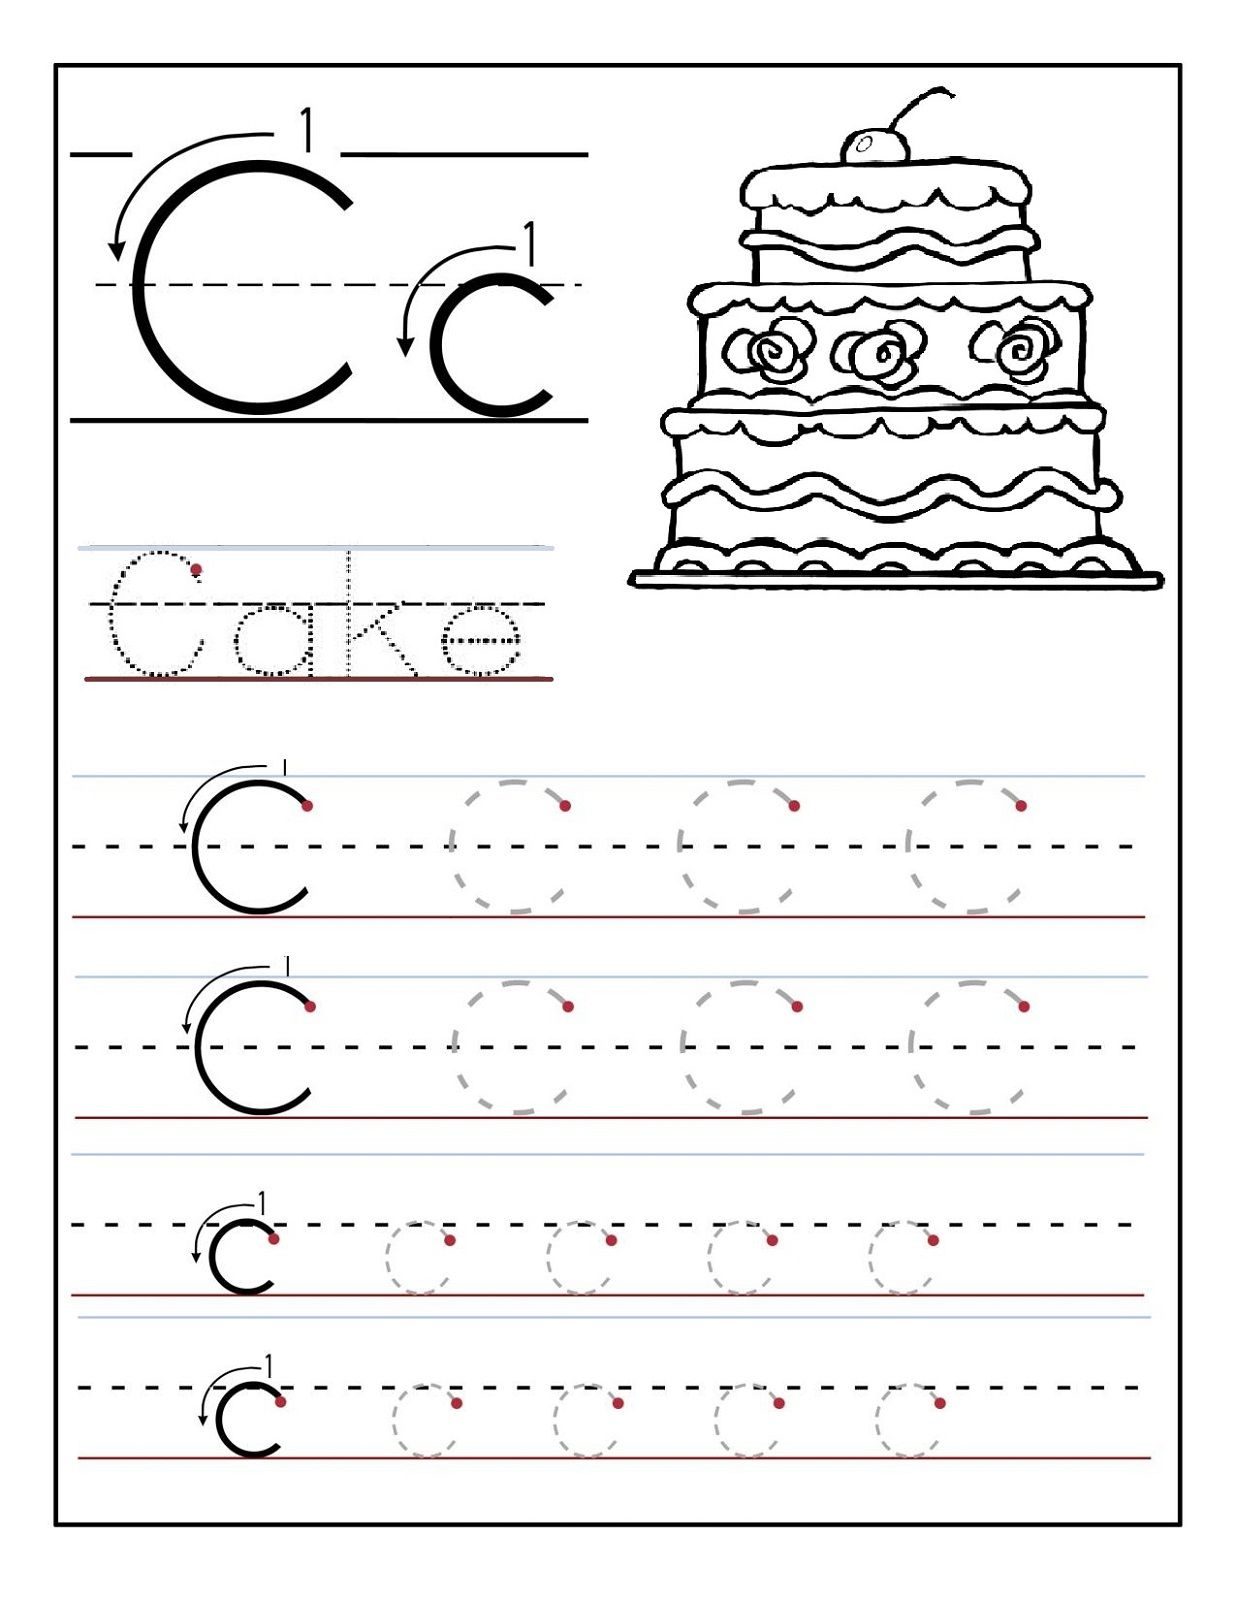 Trace The Letter C Worksheets | Preschool Letters, Alphabet inside Letter C Worksheets For Pre K